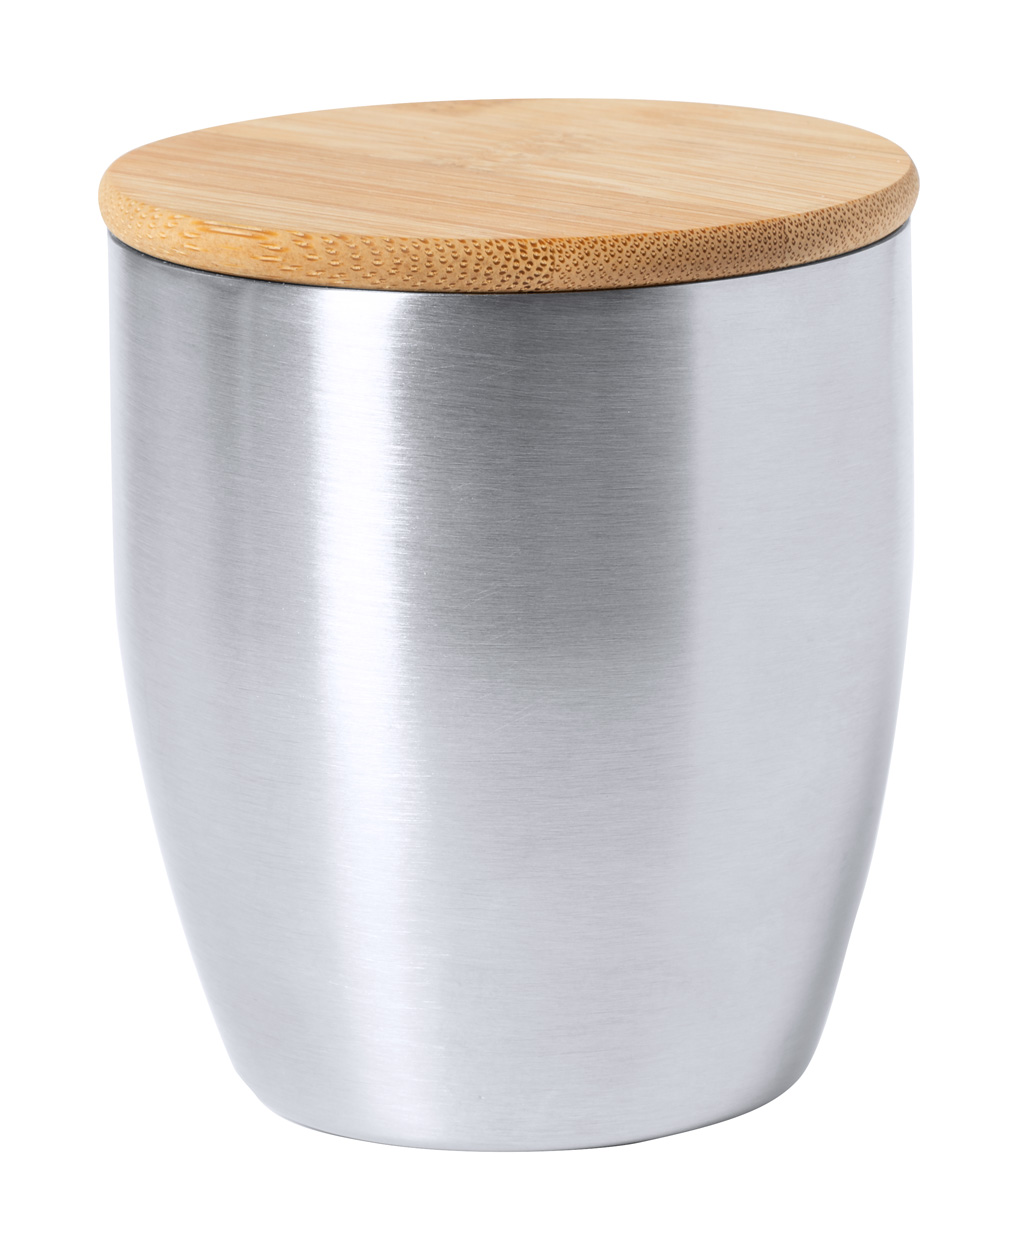 Sow a stainless steel mug - silver